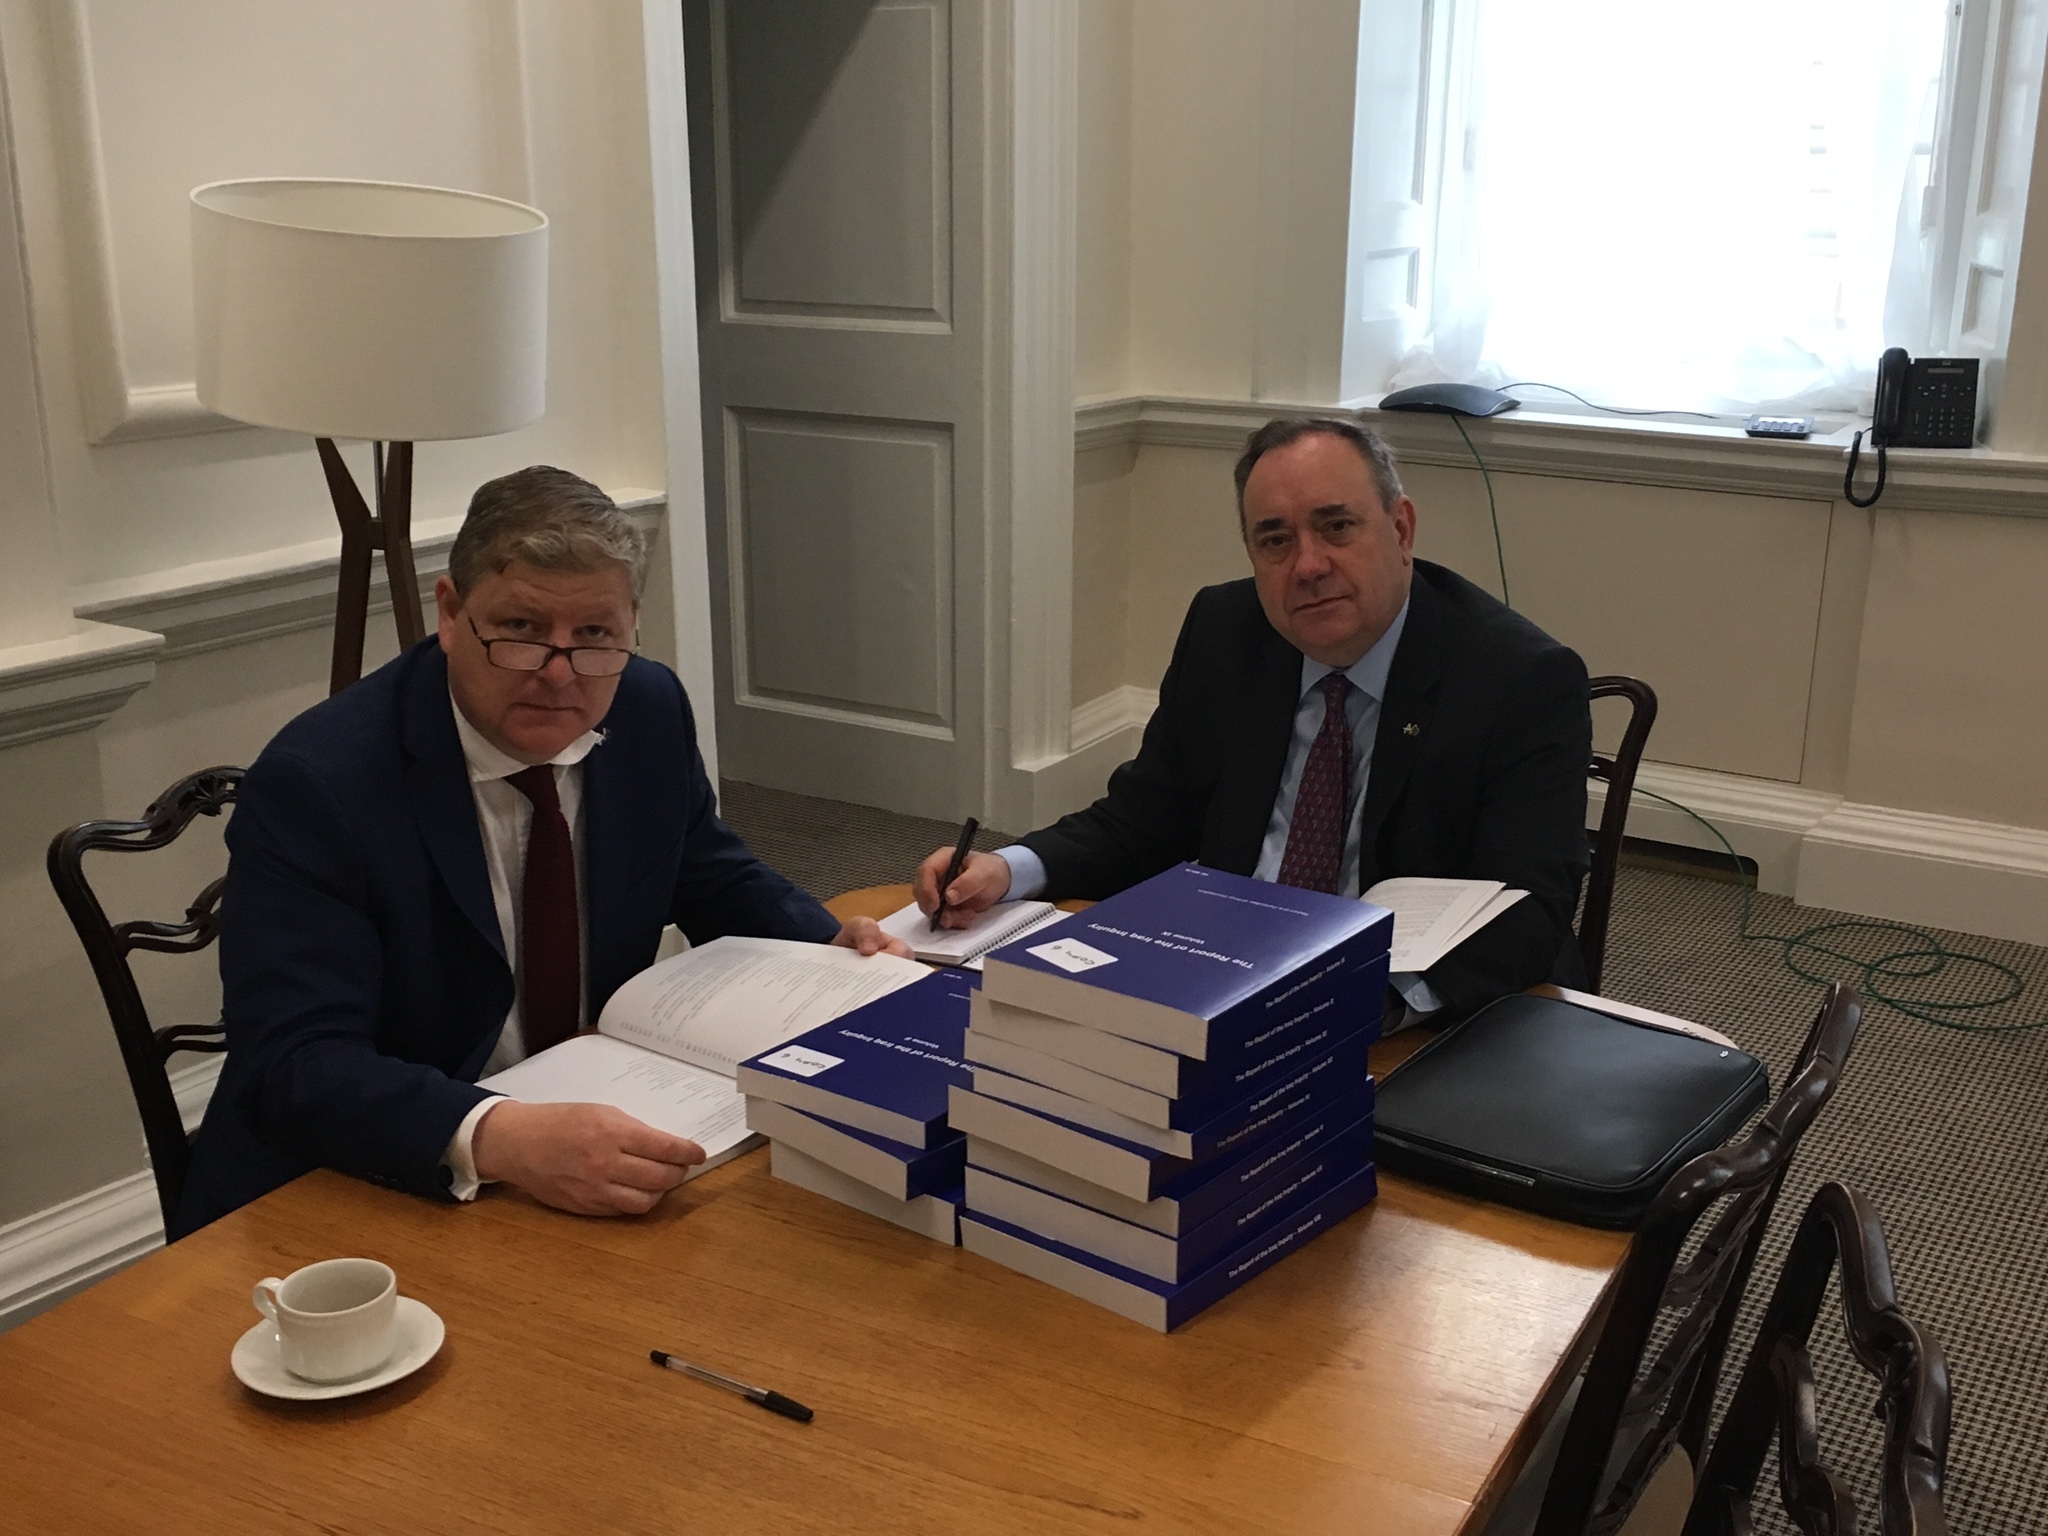 SNP Westminster Leader Angus Robertson MP and SNP Foreign Affairs spokesperson Alex Salmond MP viewing the Chilcot Report this morning